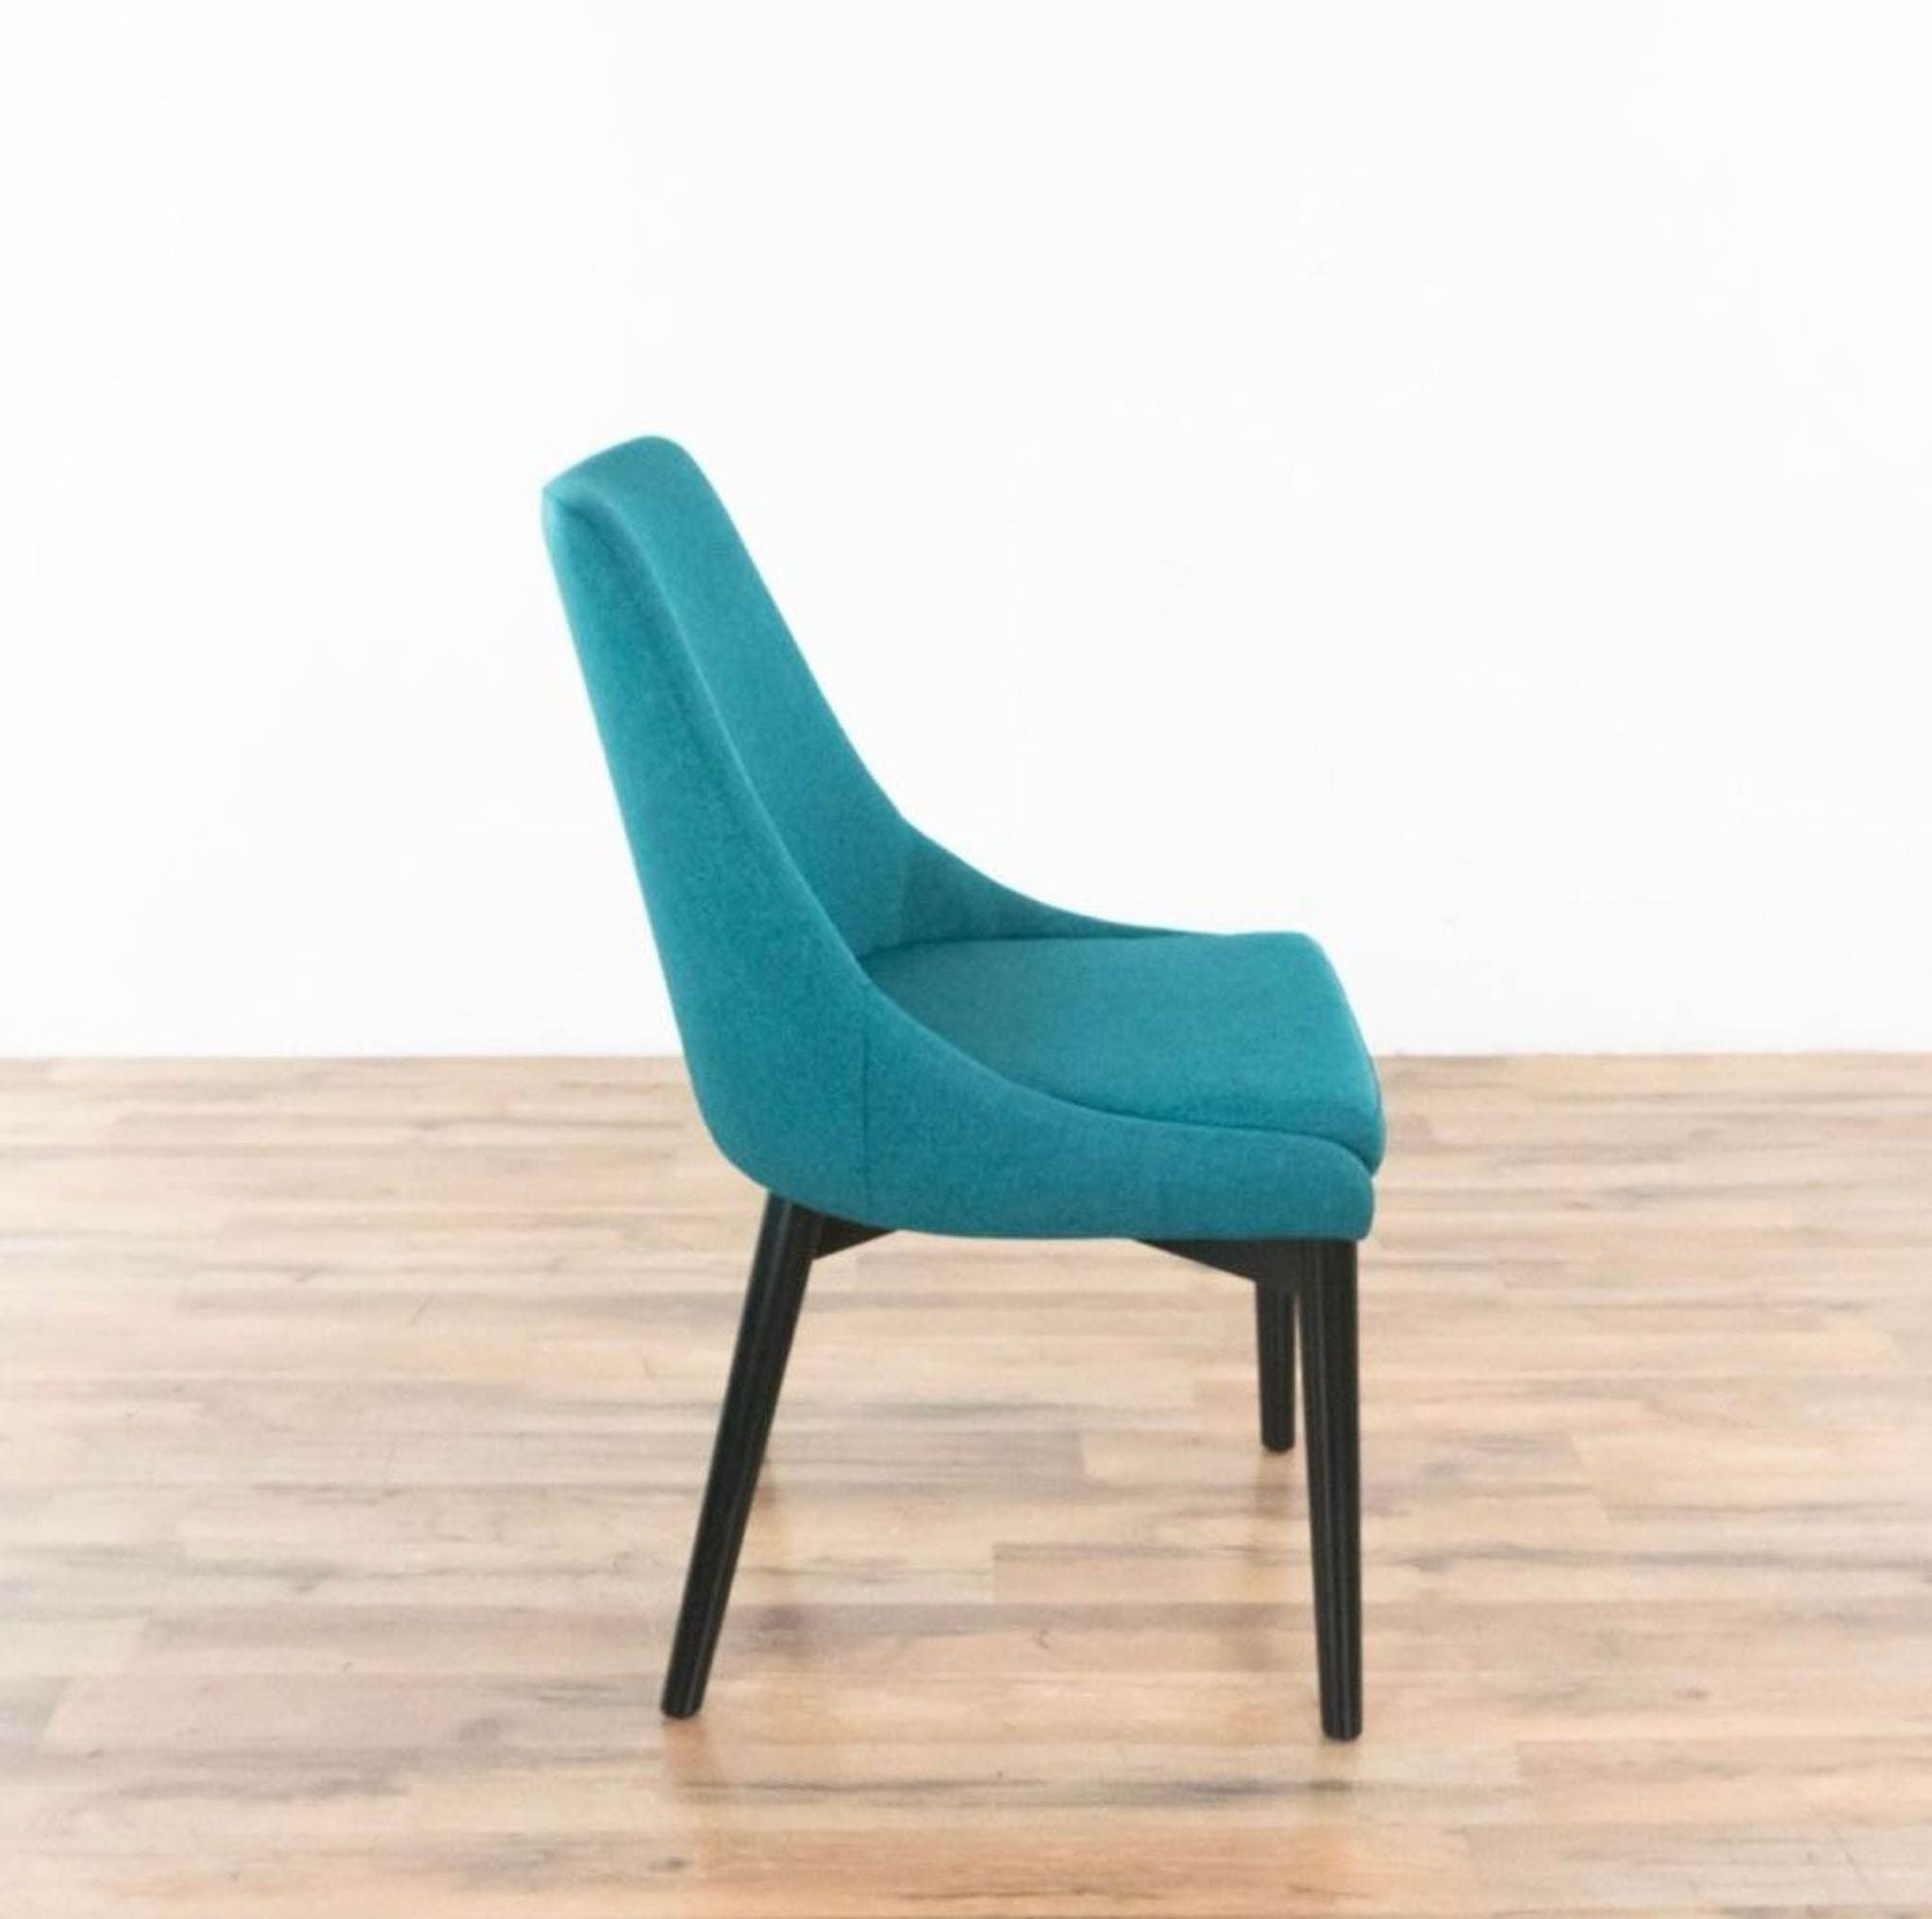 Side angle of a contemporary teal upholstered StealMod dining chair with black wooden legs, showcasing its profile.